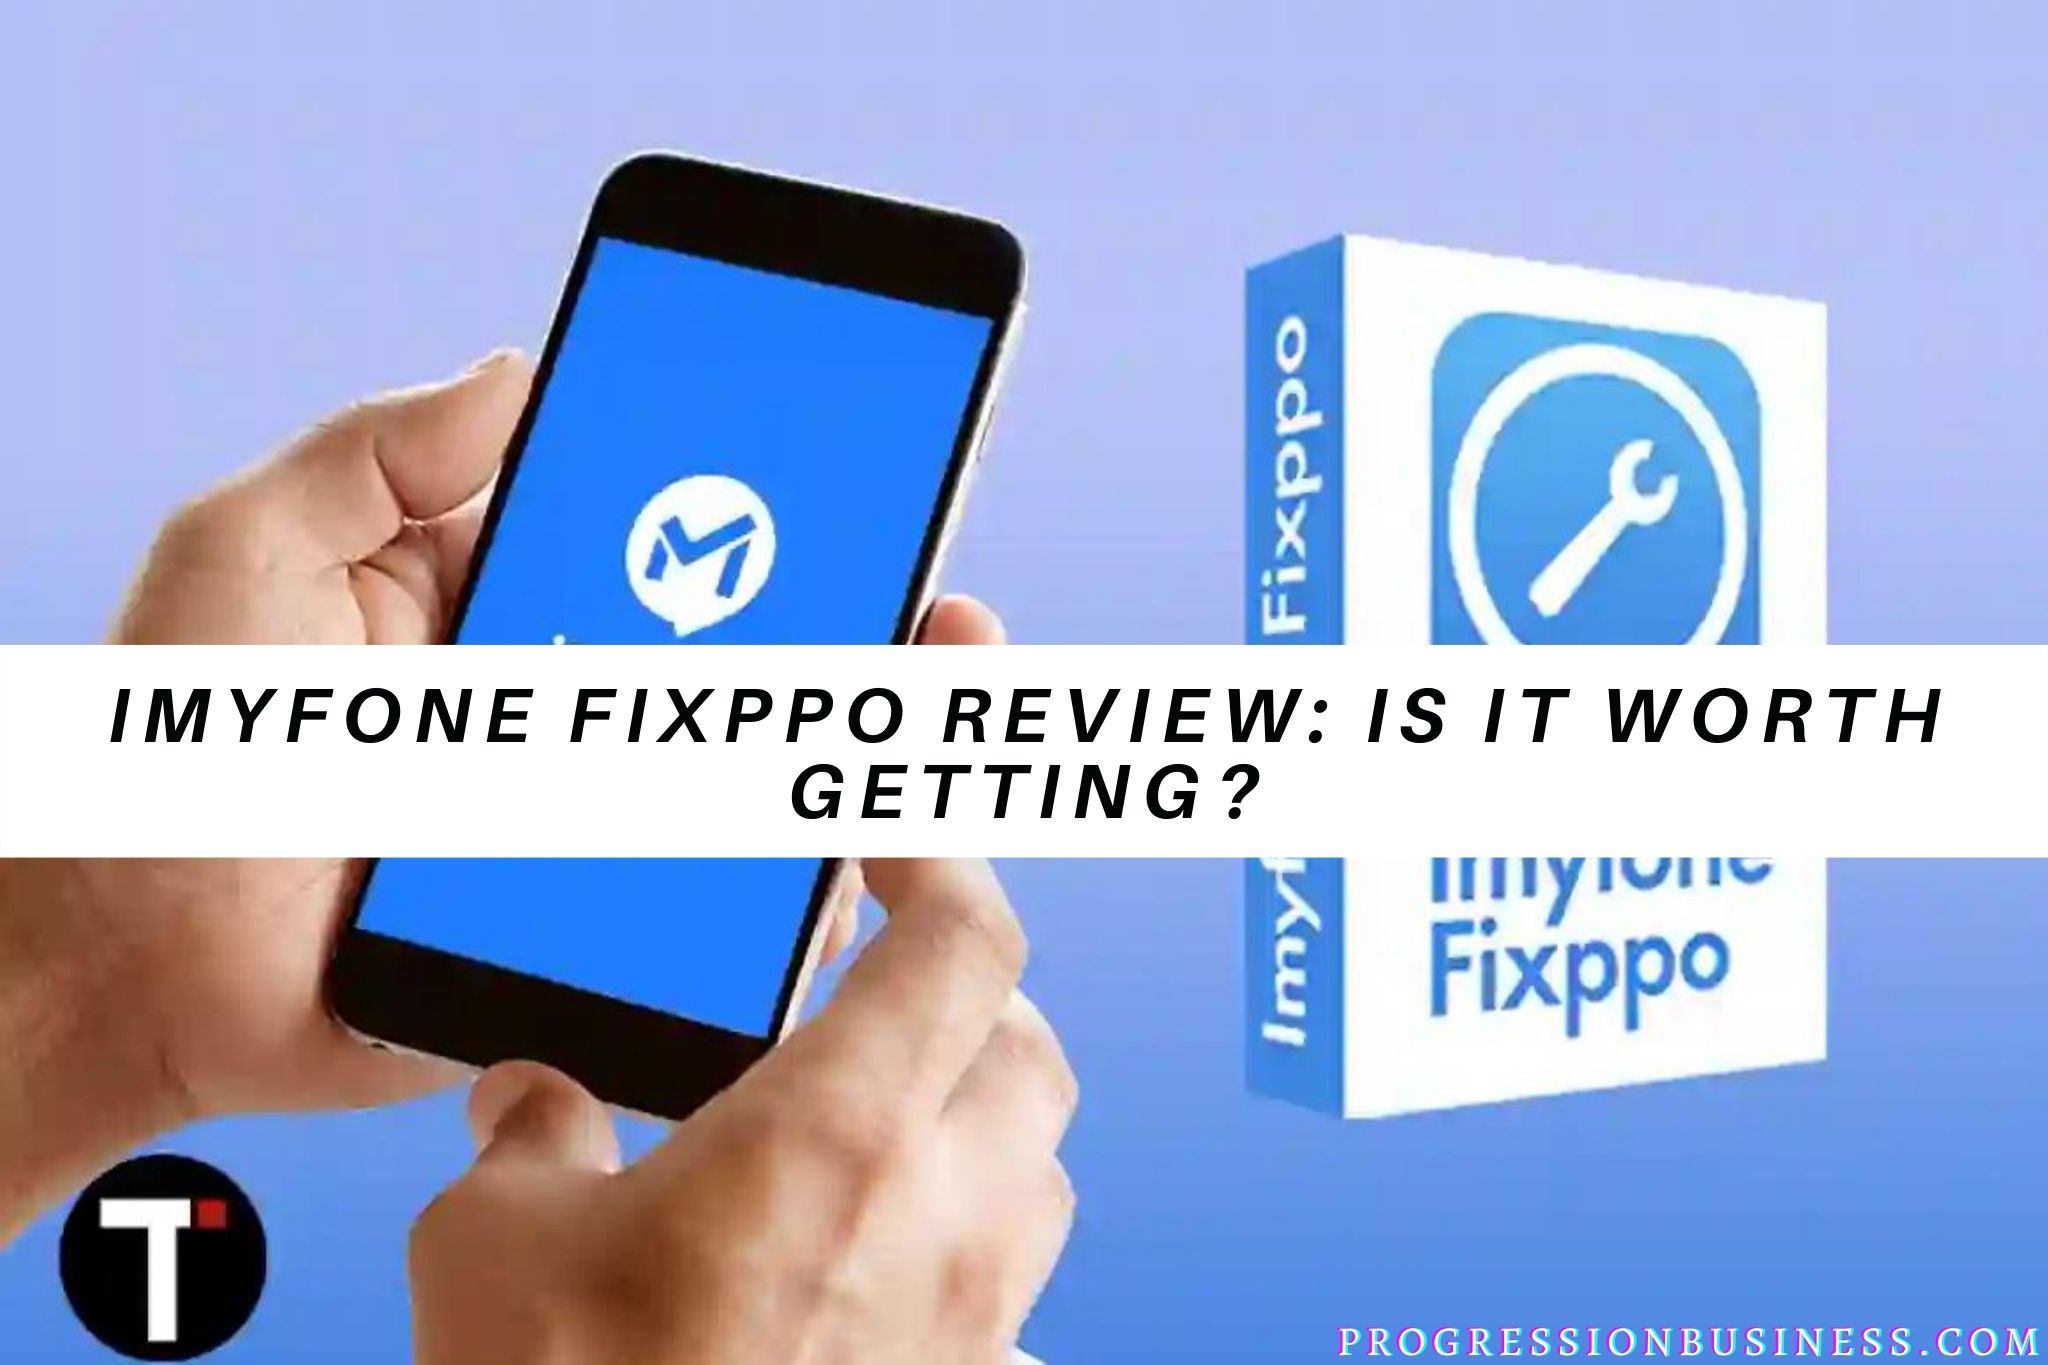 IMyFone Fixppo Review: Is It Worth Getting?